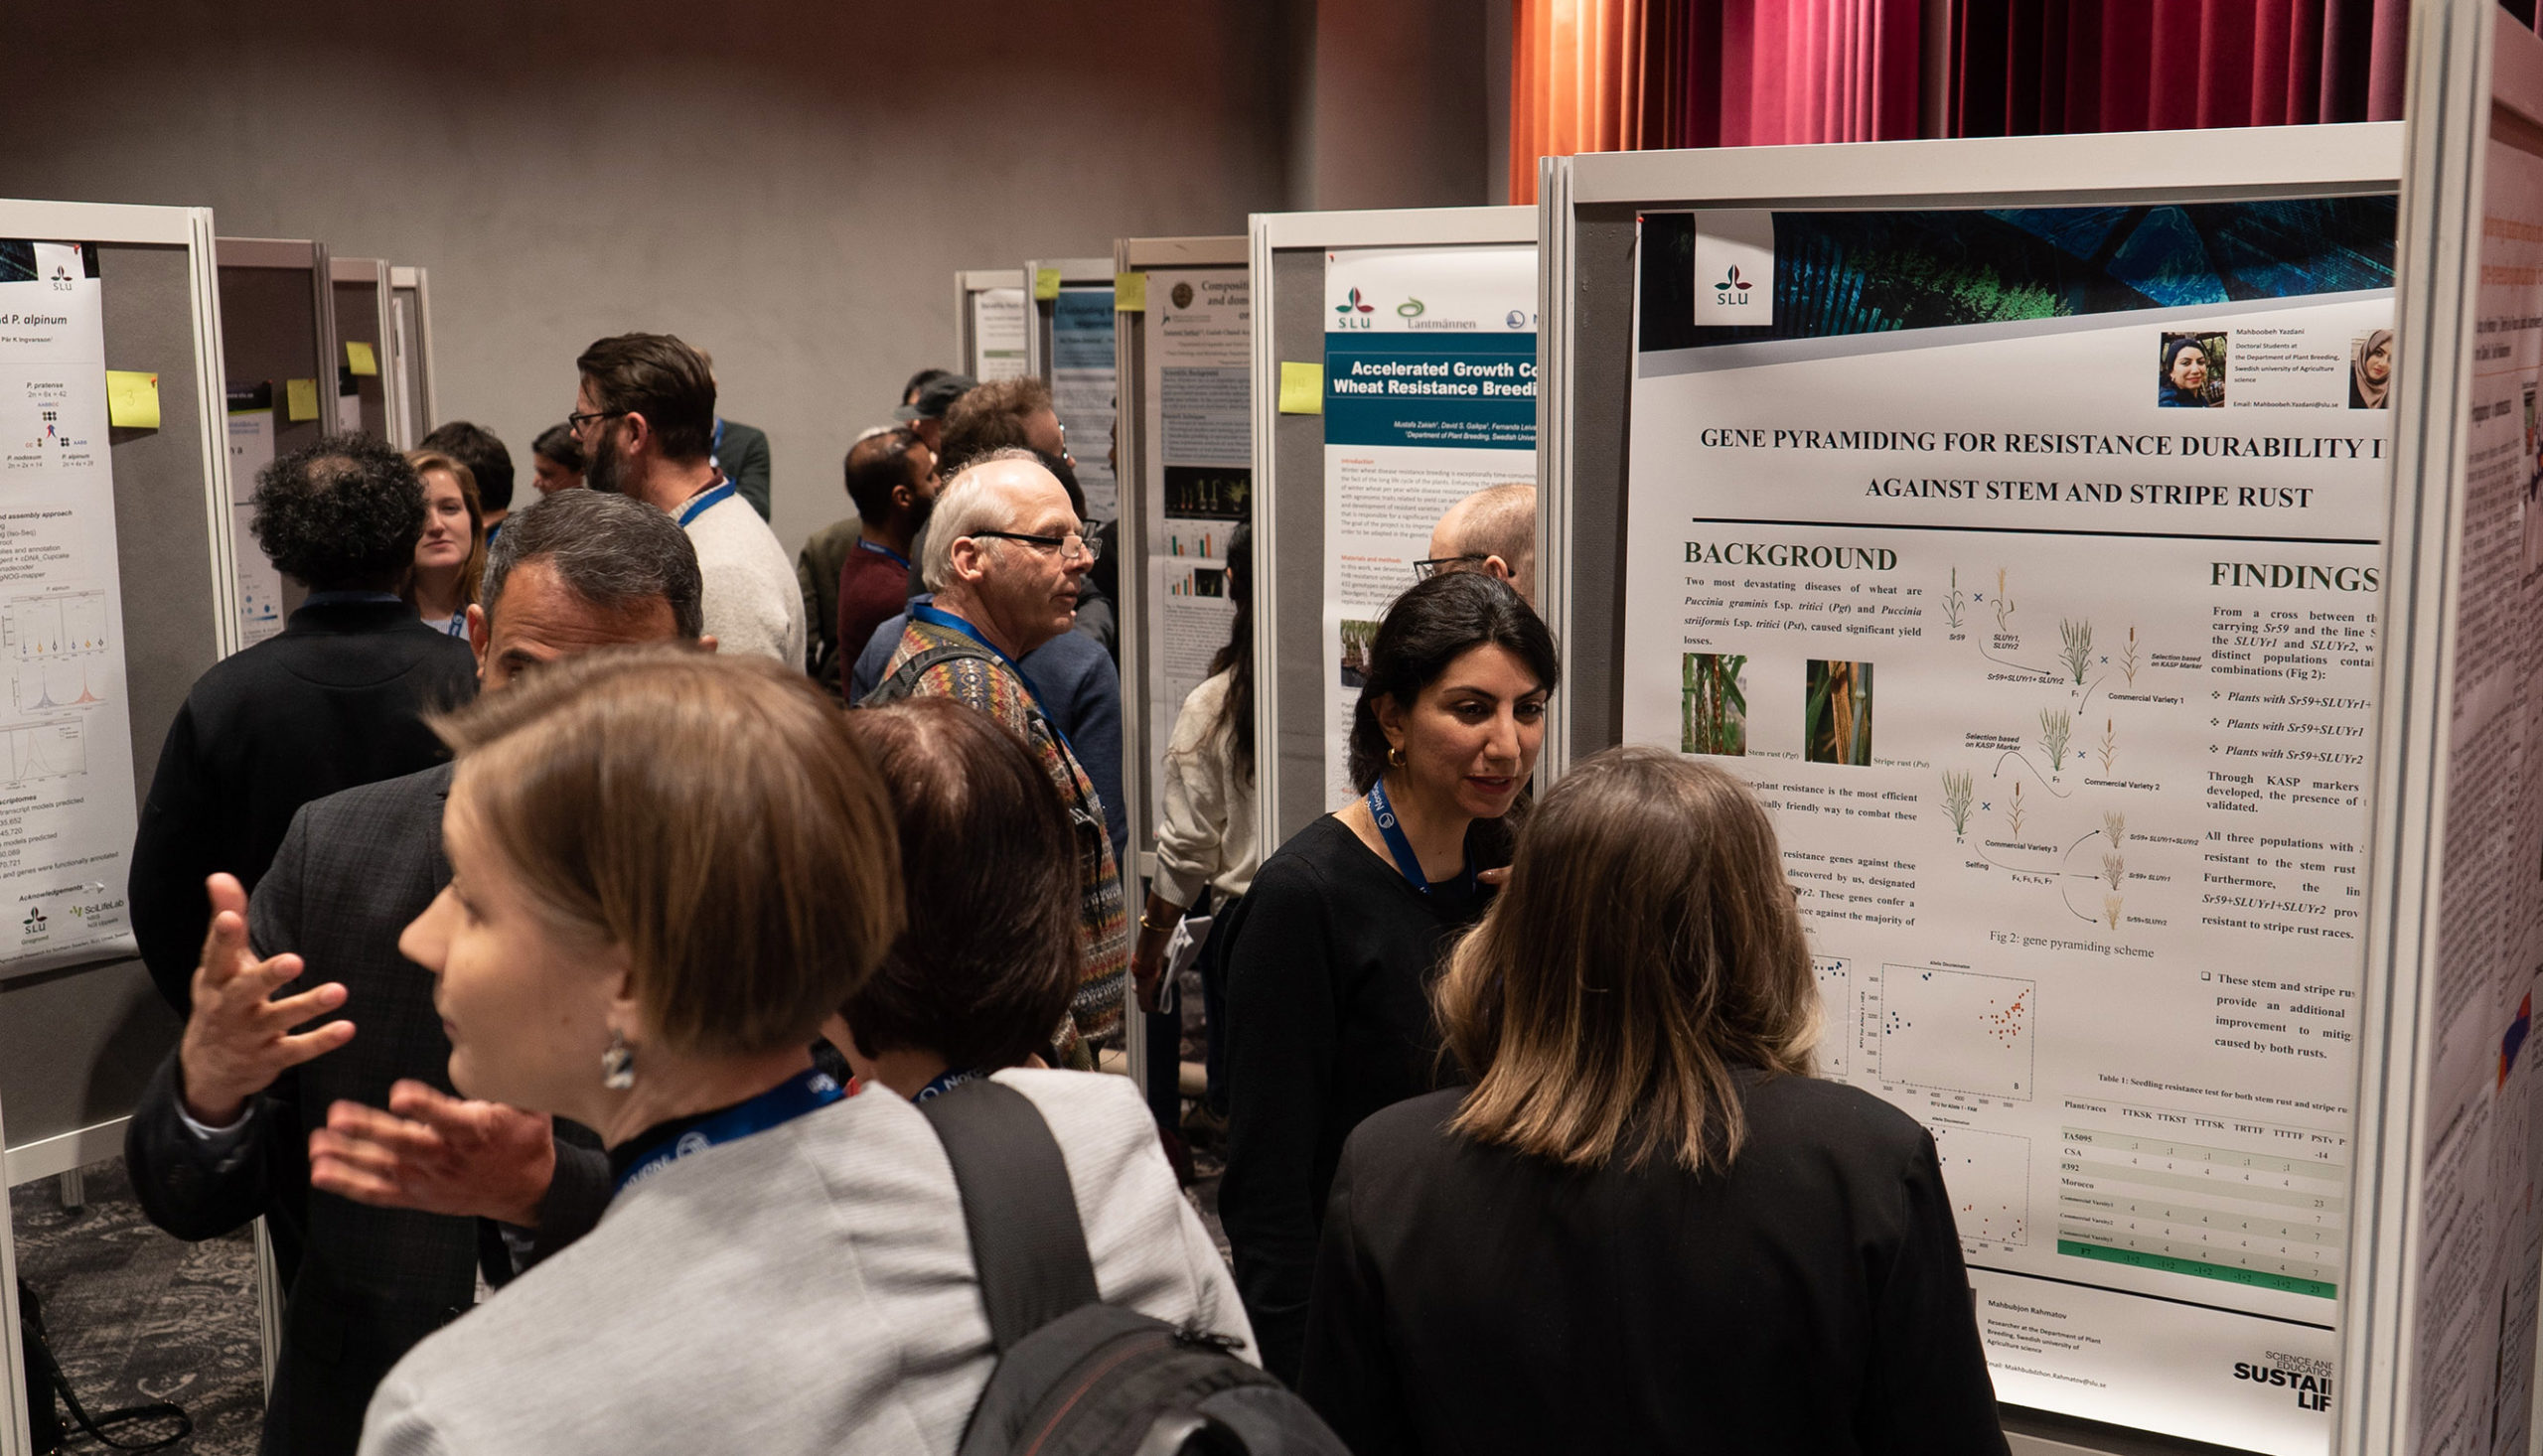 A poster session focusing on young research was organized. 